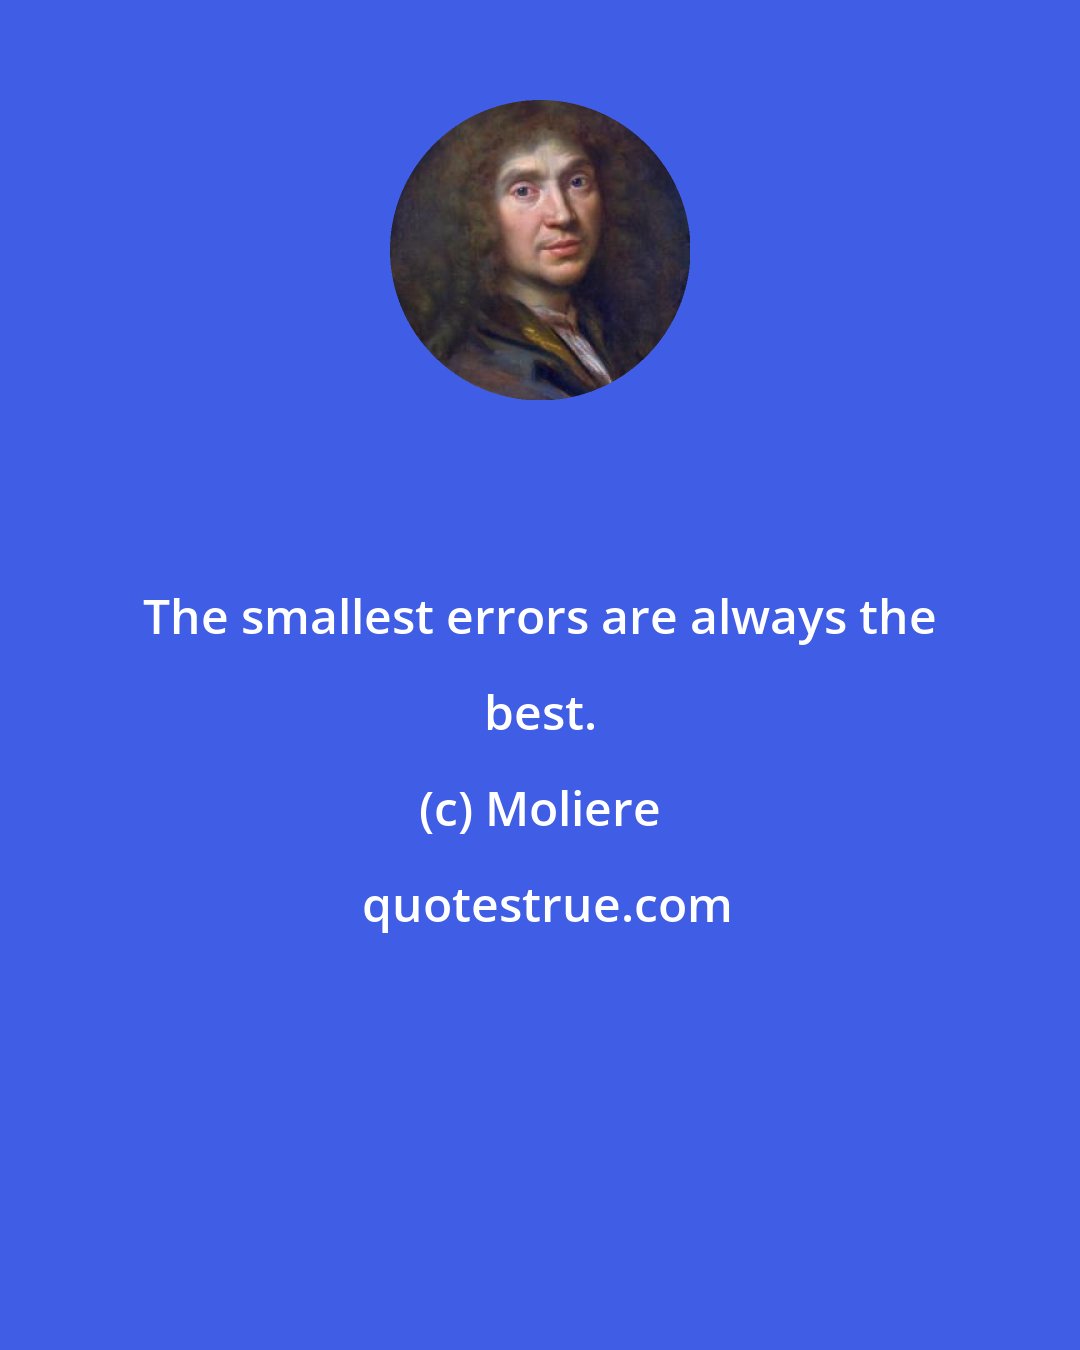 Moliere: The smallest errors are always the best.